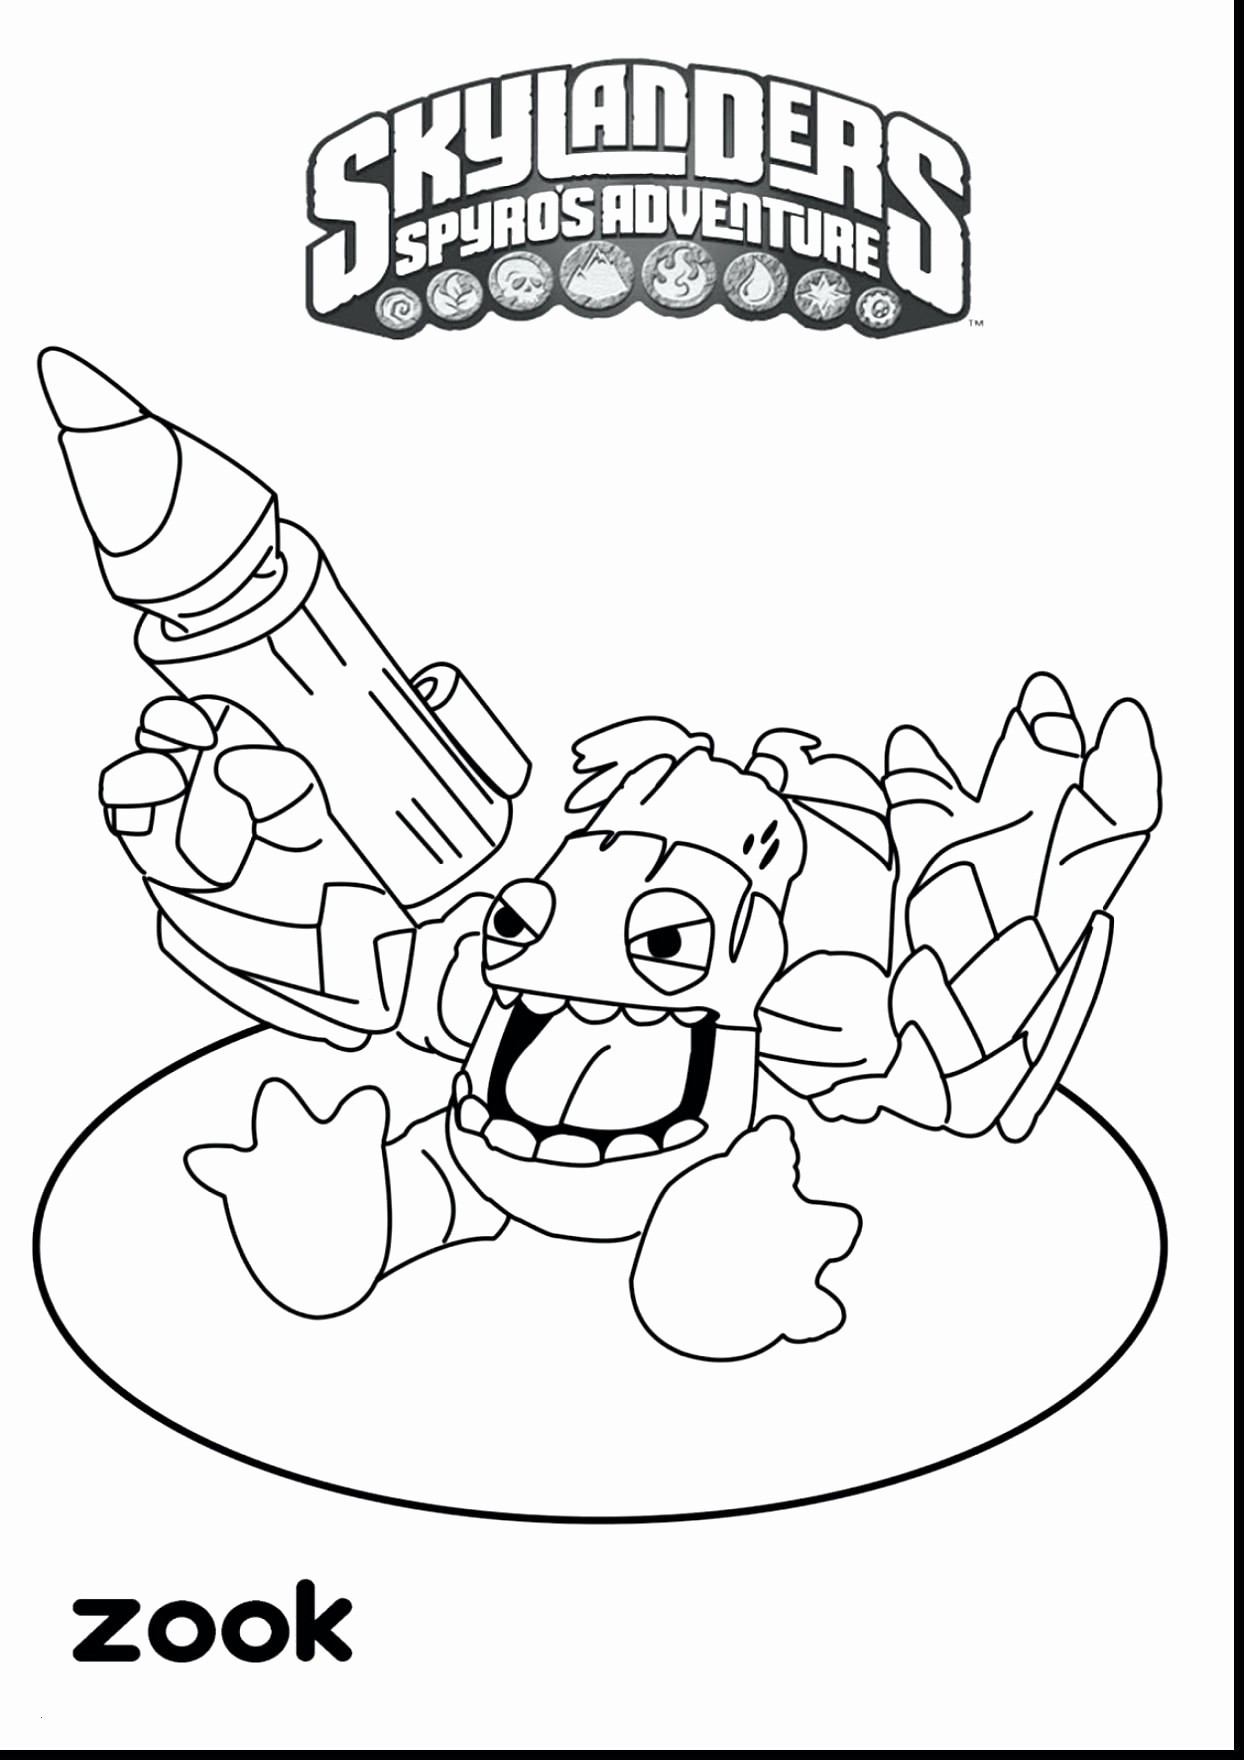 Printable Coloring Pages for Girls Beautiful Coloring Pages for Girls Lovely Printable Cds 0d – Fun